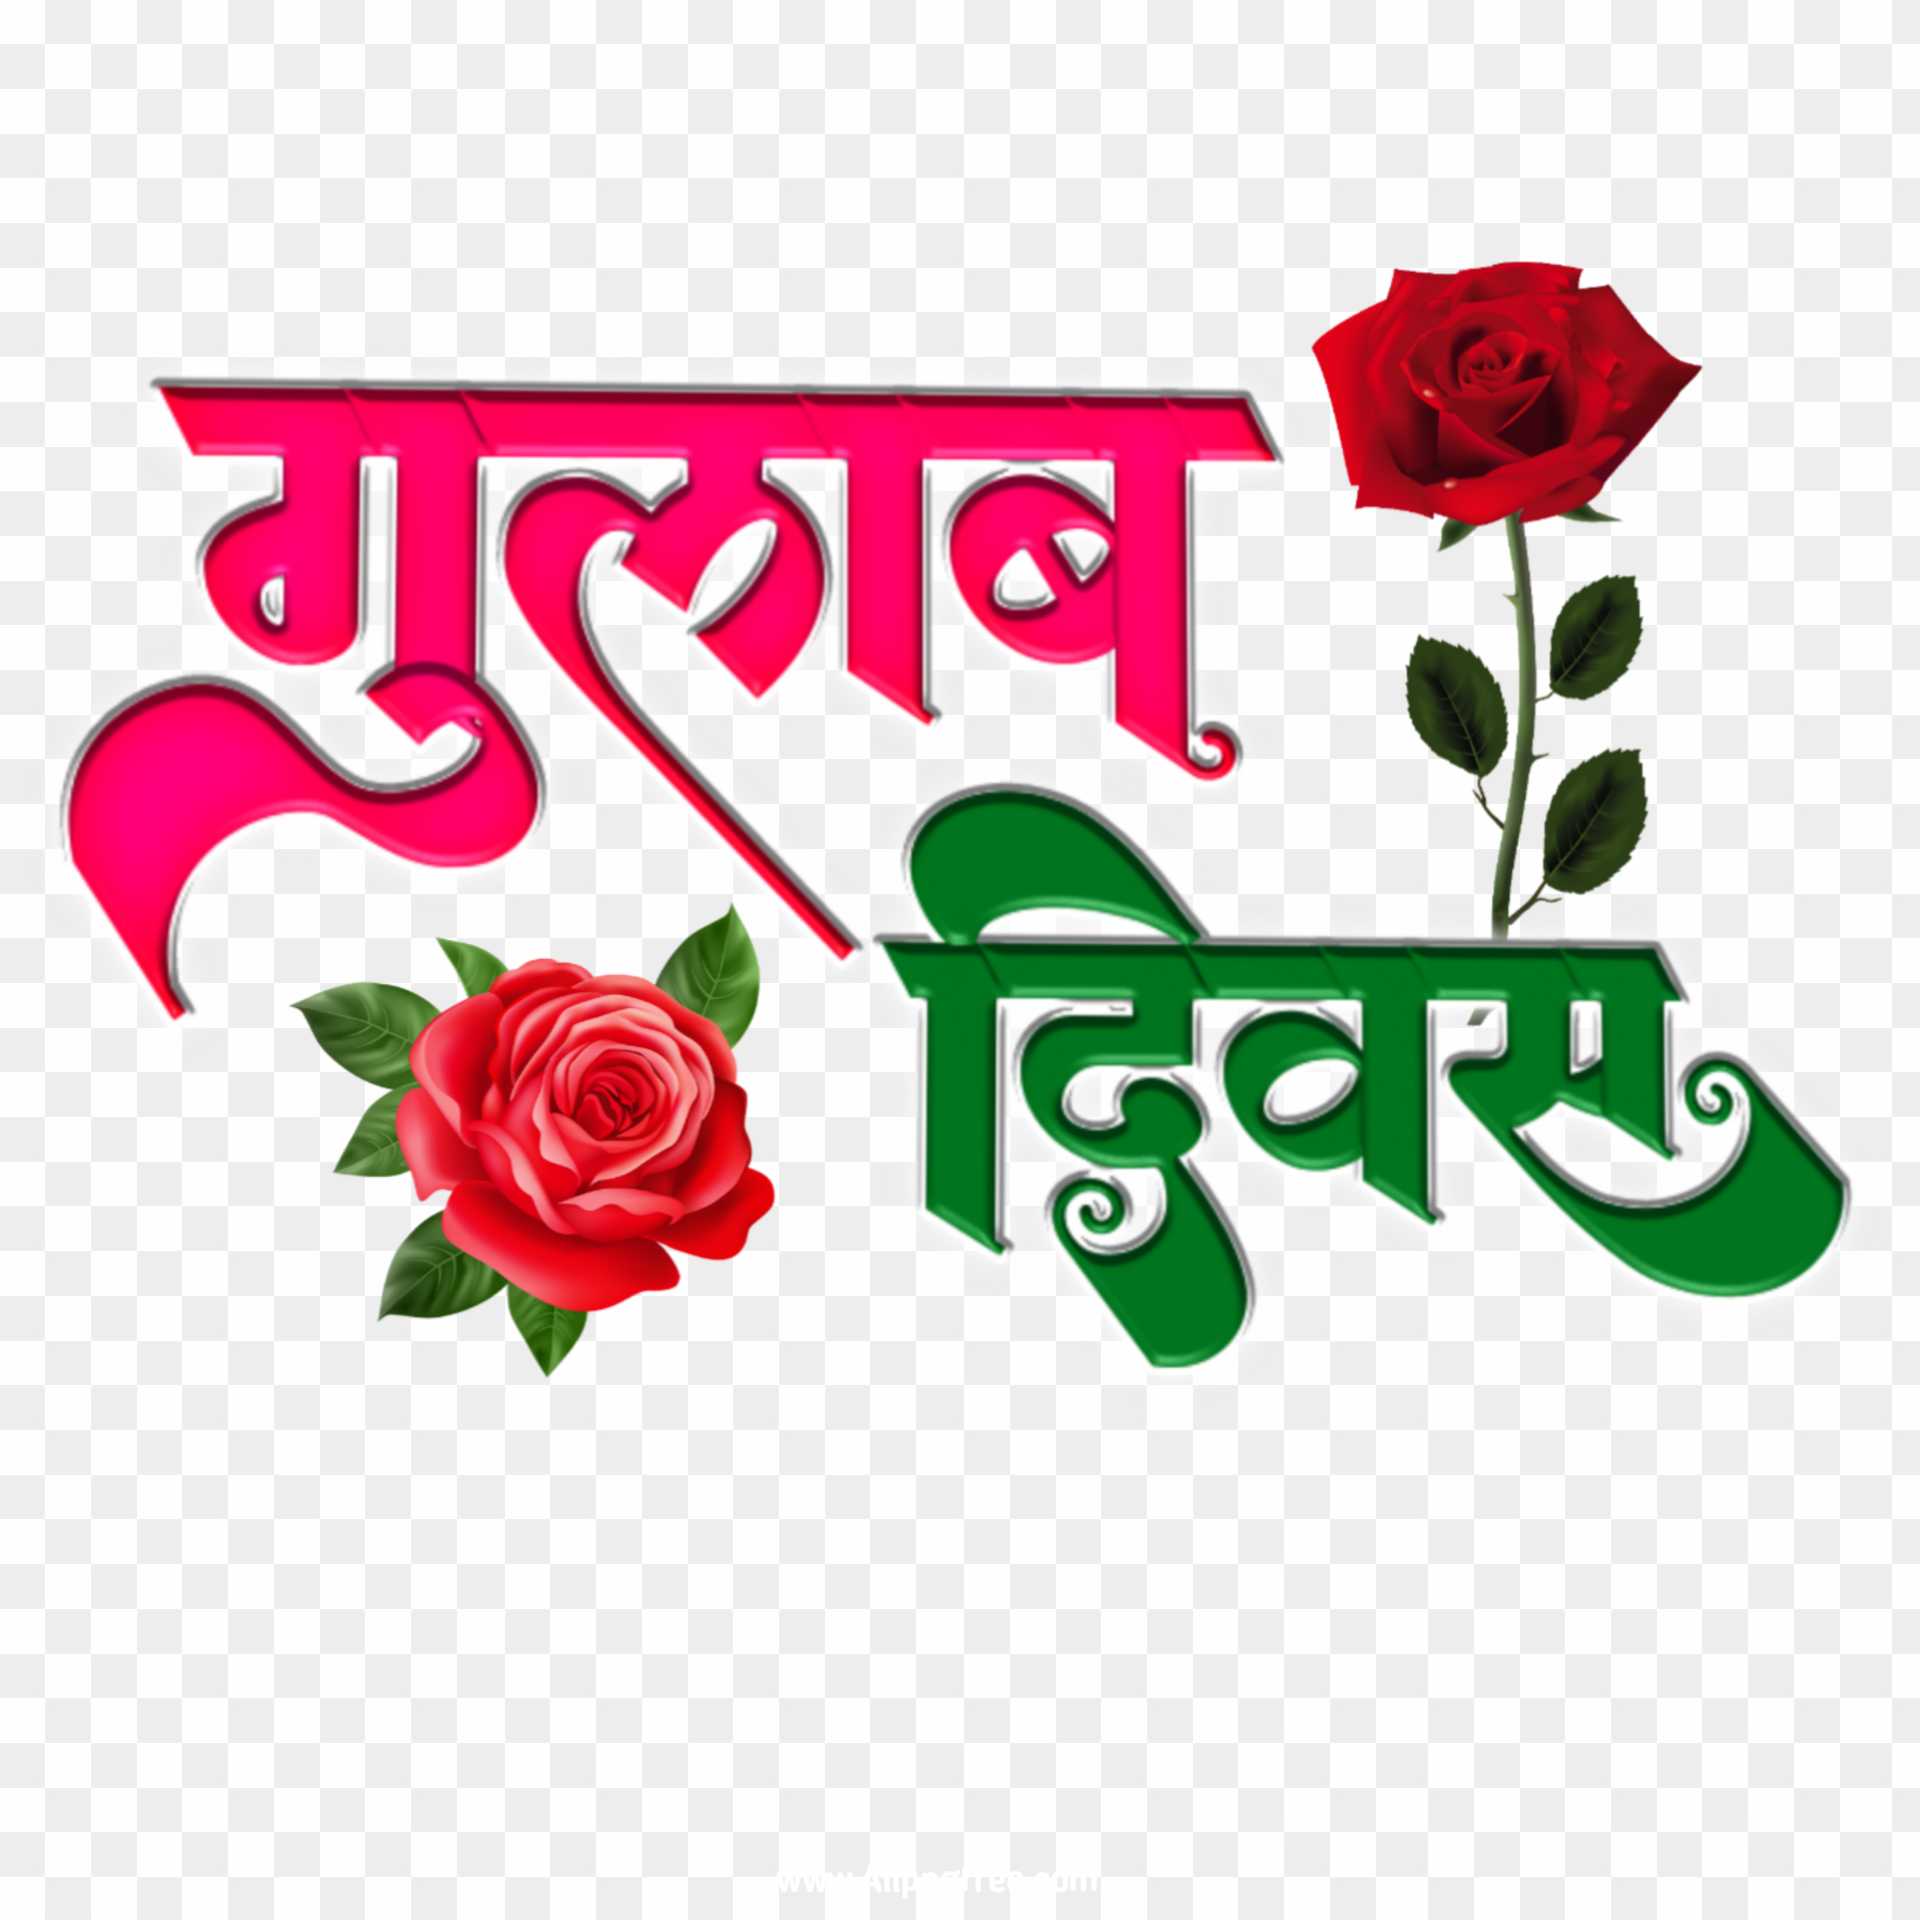 Happy Rose Day in Hindi text PNG images download